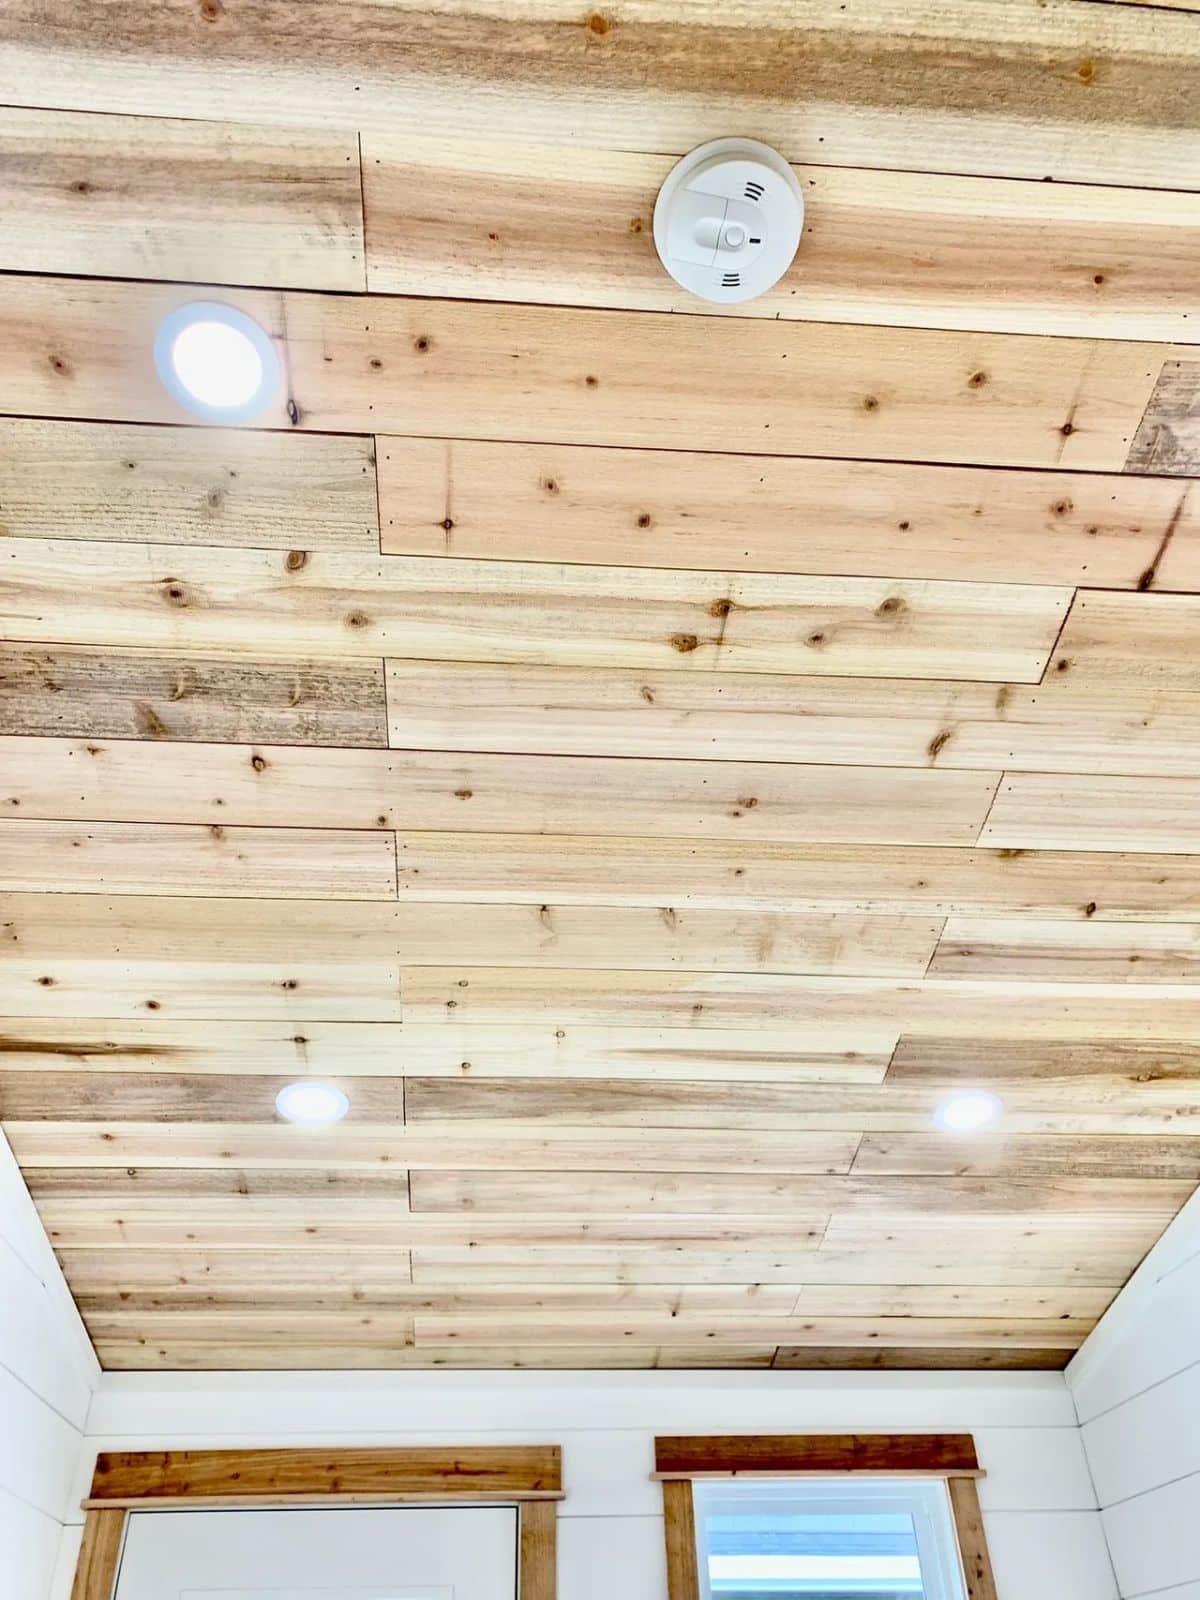 LED lights installed on the roof of Ascent tiny home